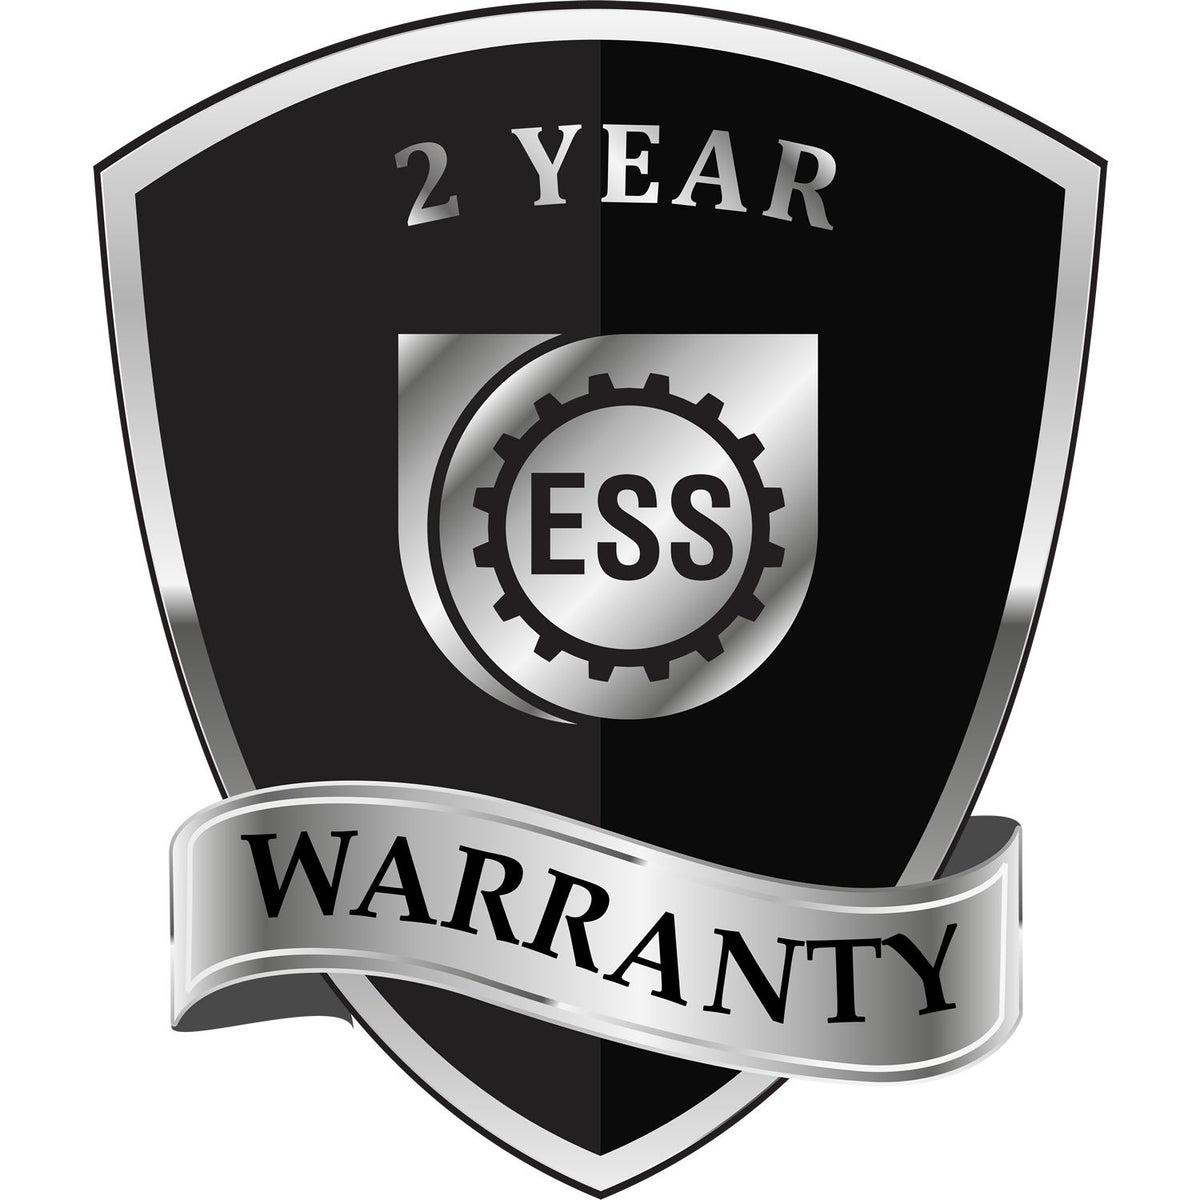 A black and silver badge or emblem showing warranty information for the Gift Massachusetts Engineer Seal